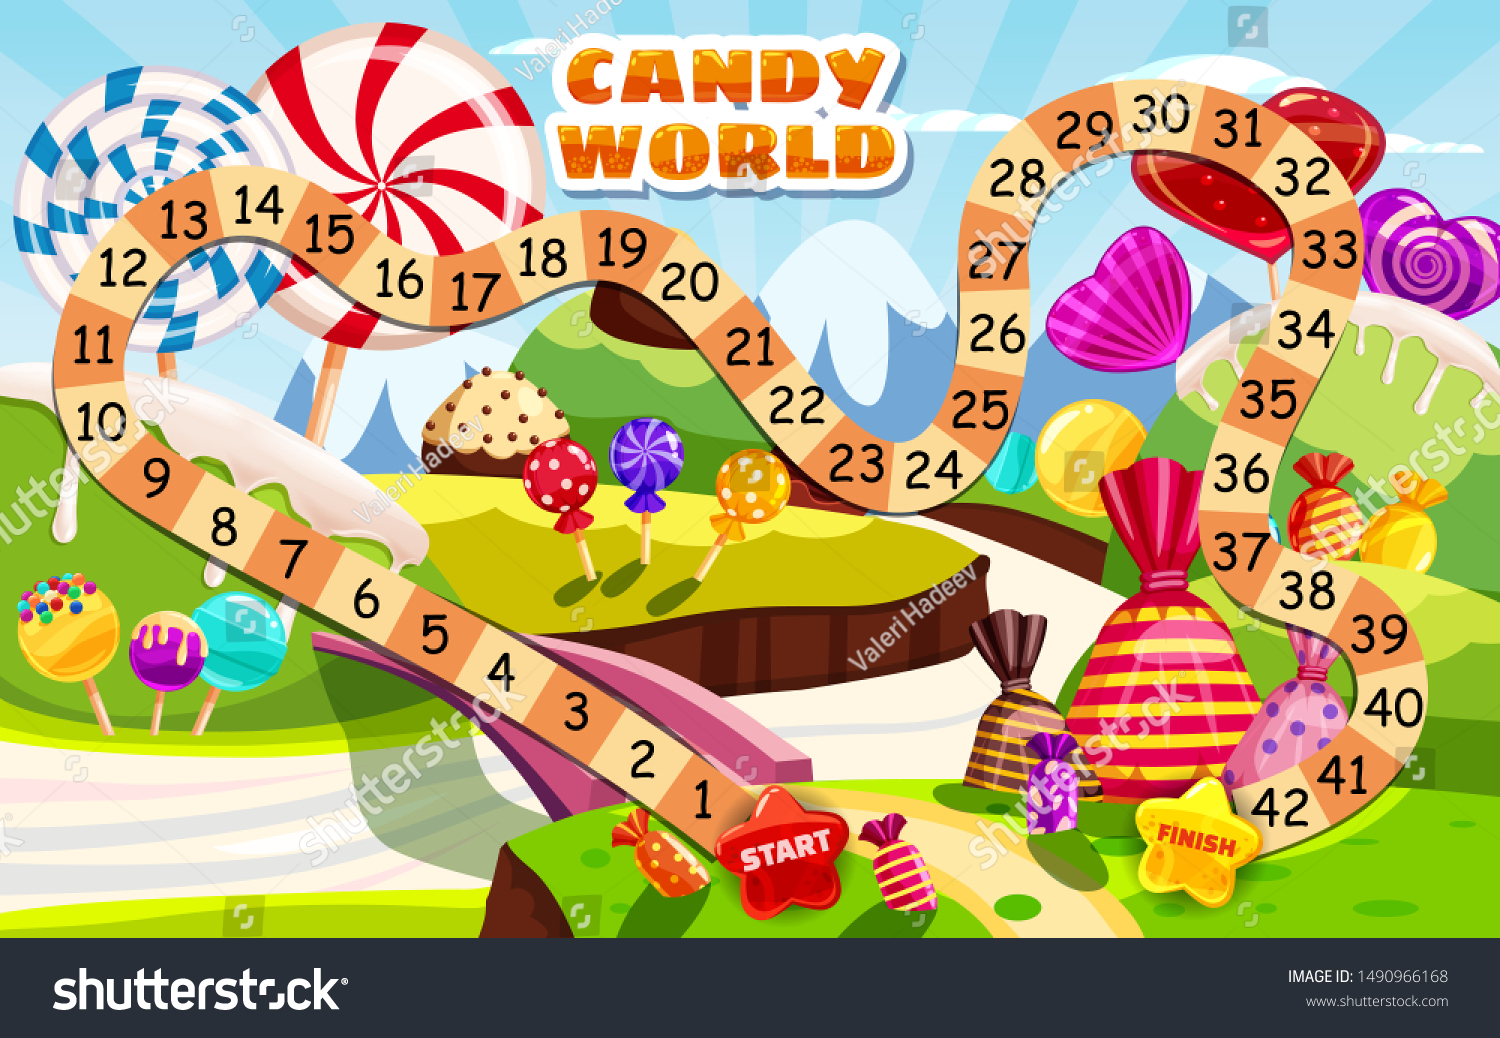 candy journey 2